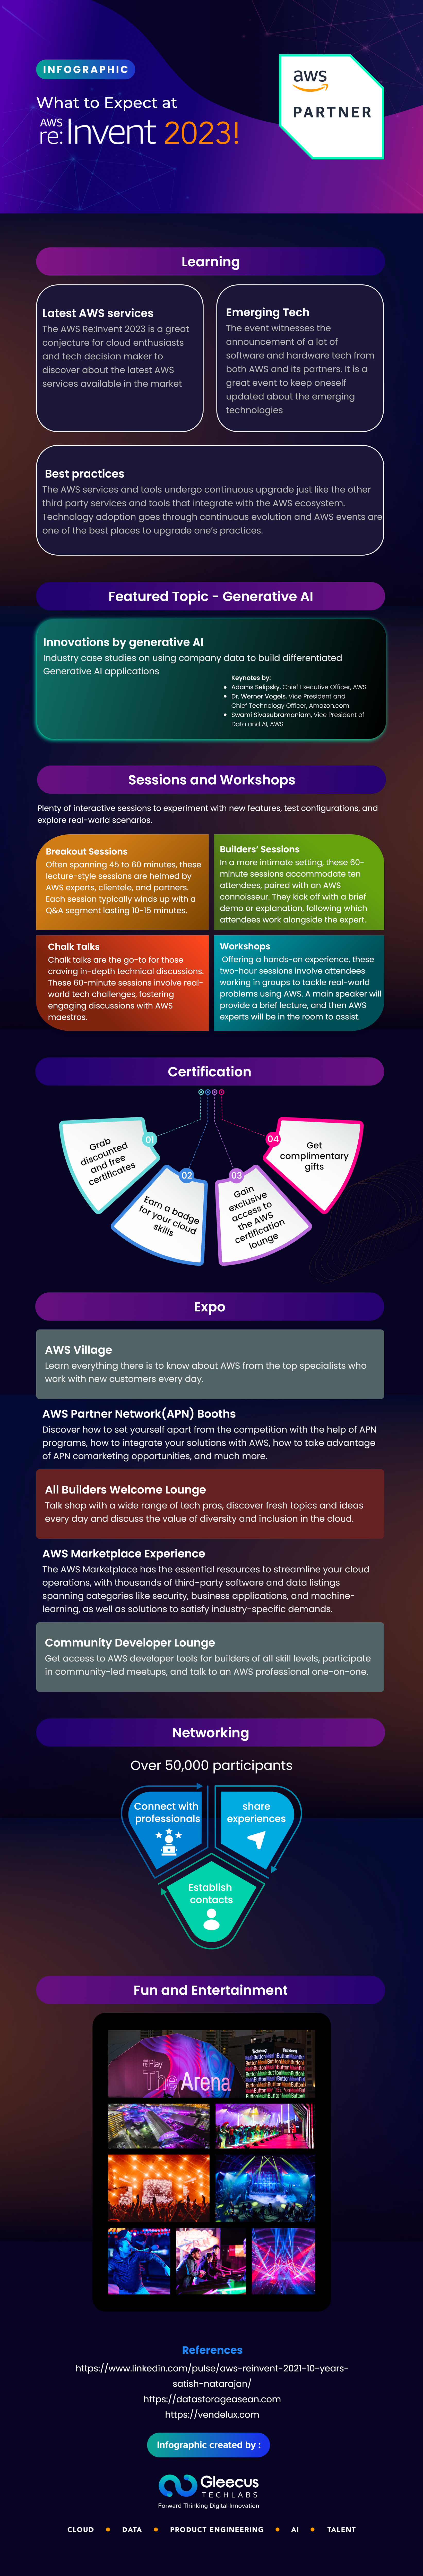 AWS Reinvent Infographic